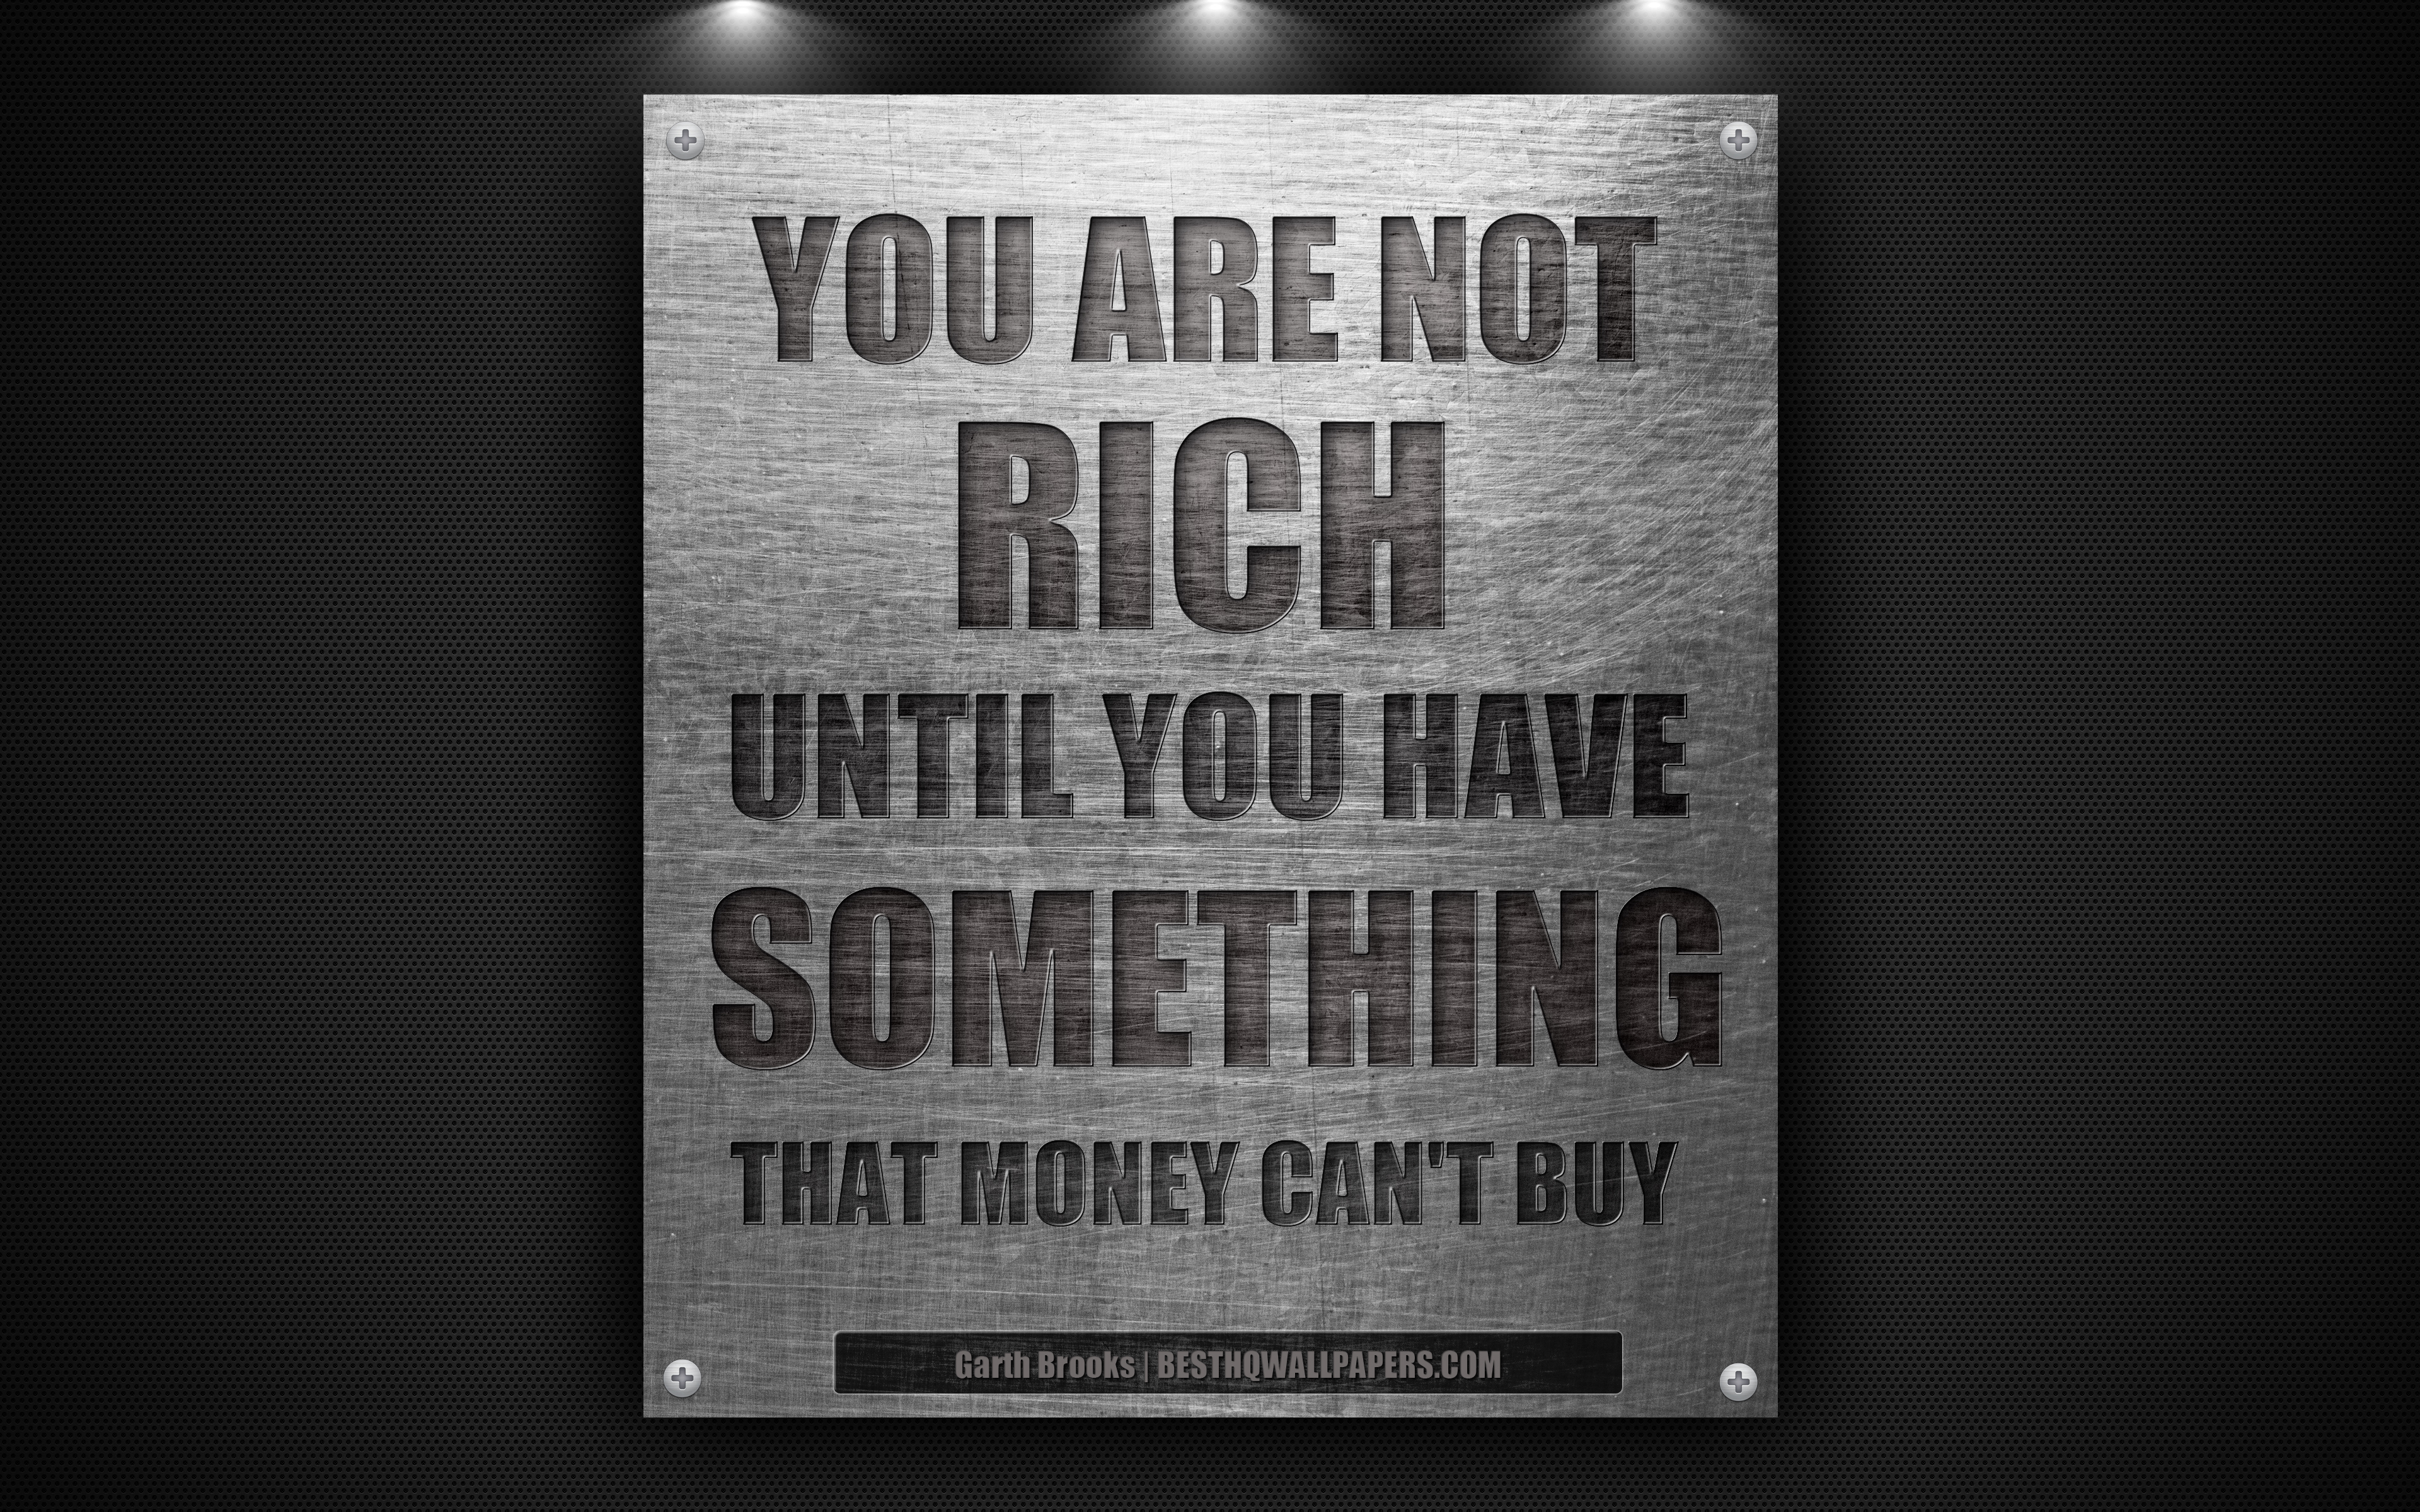 Download wallpaper You are not rich until you have something that money cant buy, Garth Brooks, wallpaper quotes, motivation, inspiration, quotes about wealth, 4k, iron plate for desktop with resolution 3840x2400. High